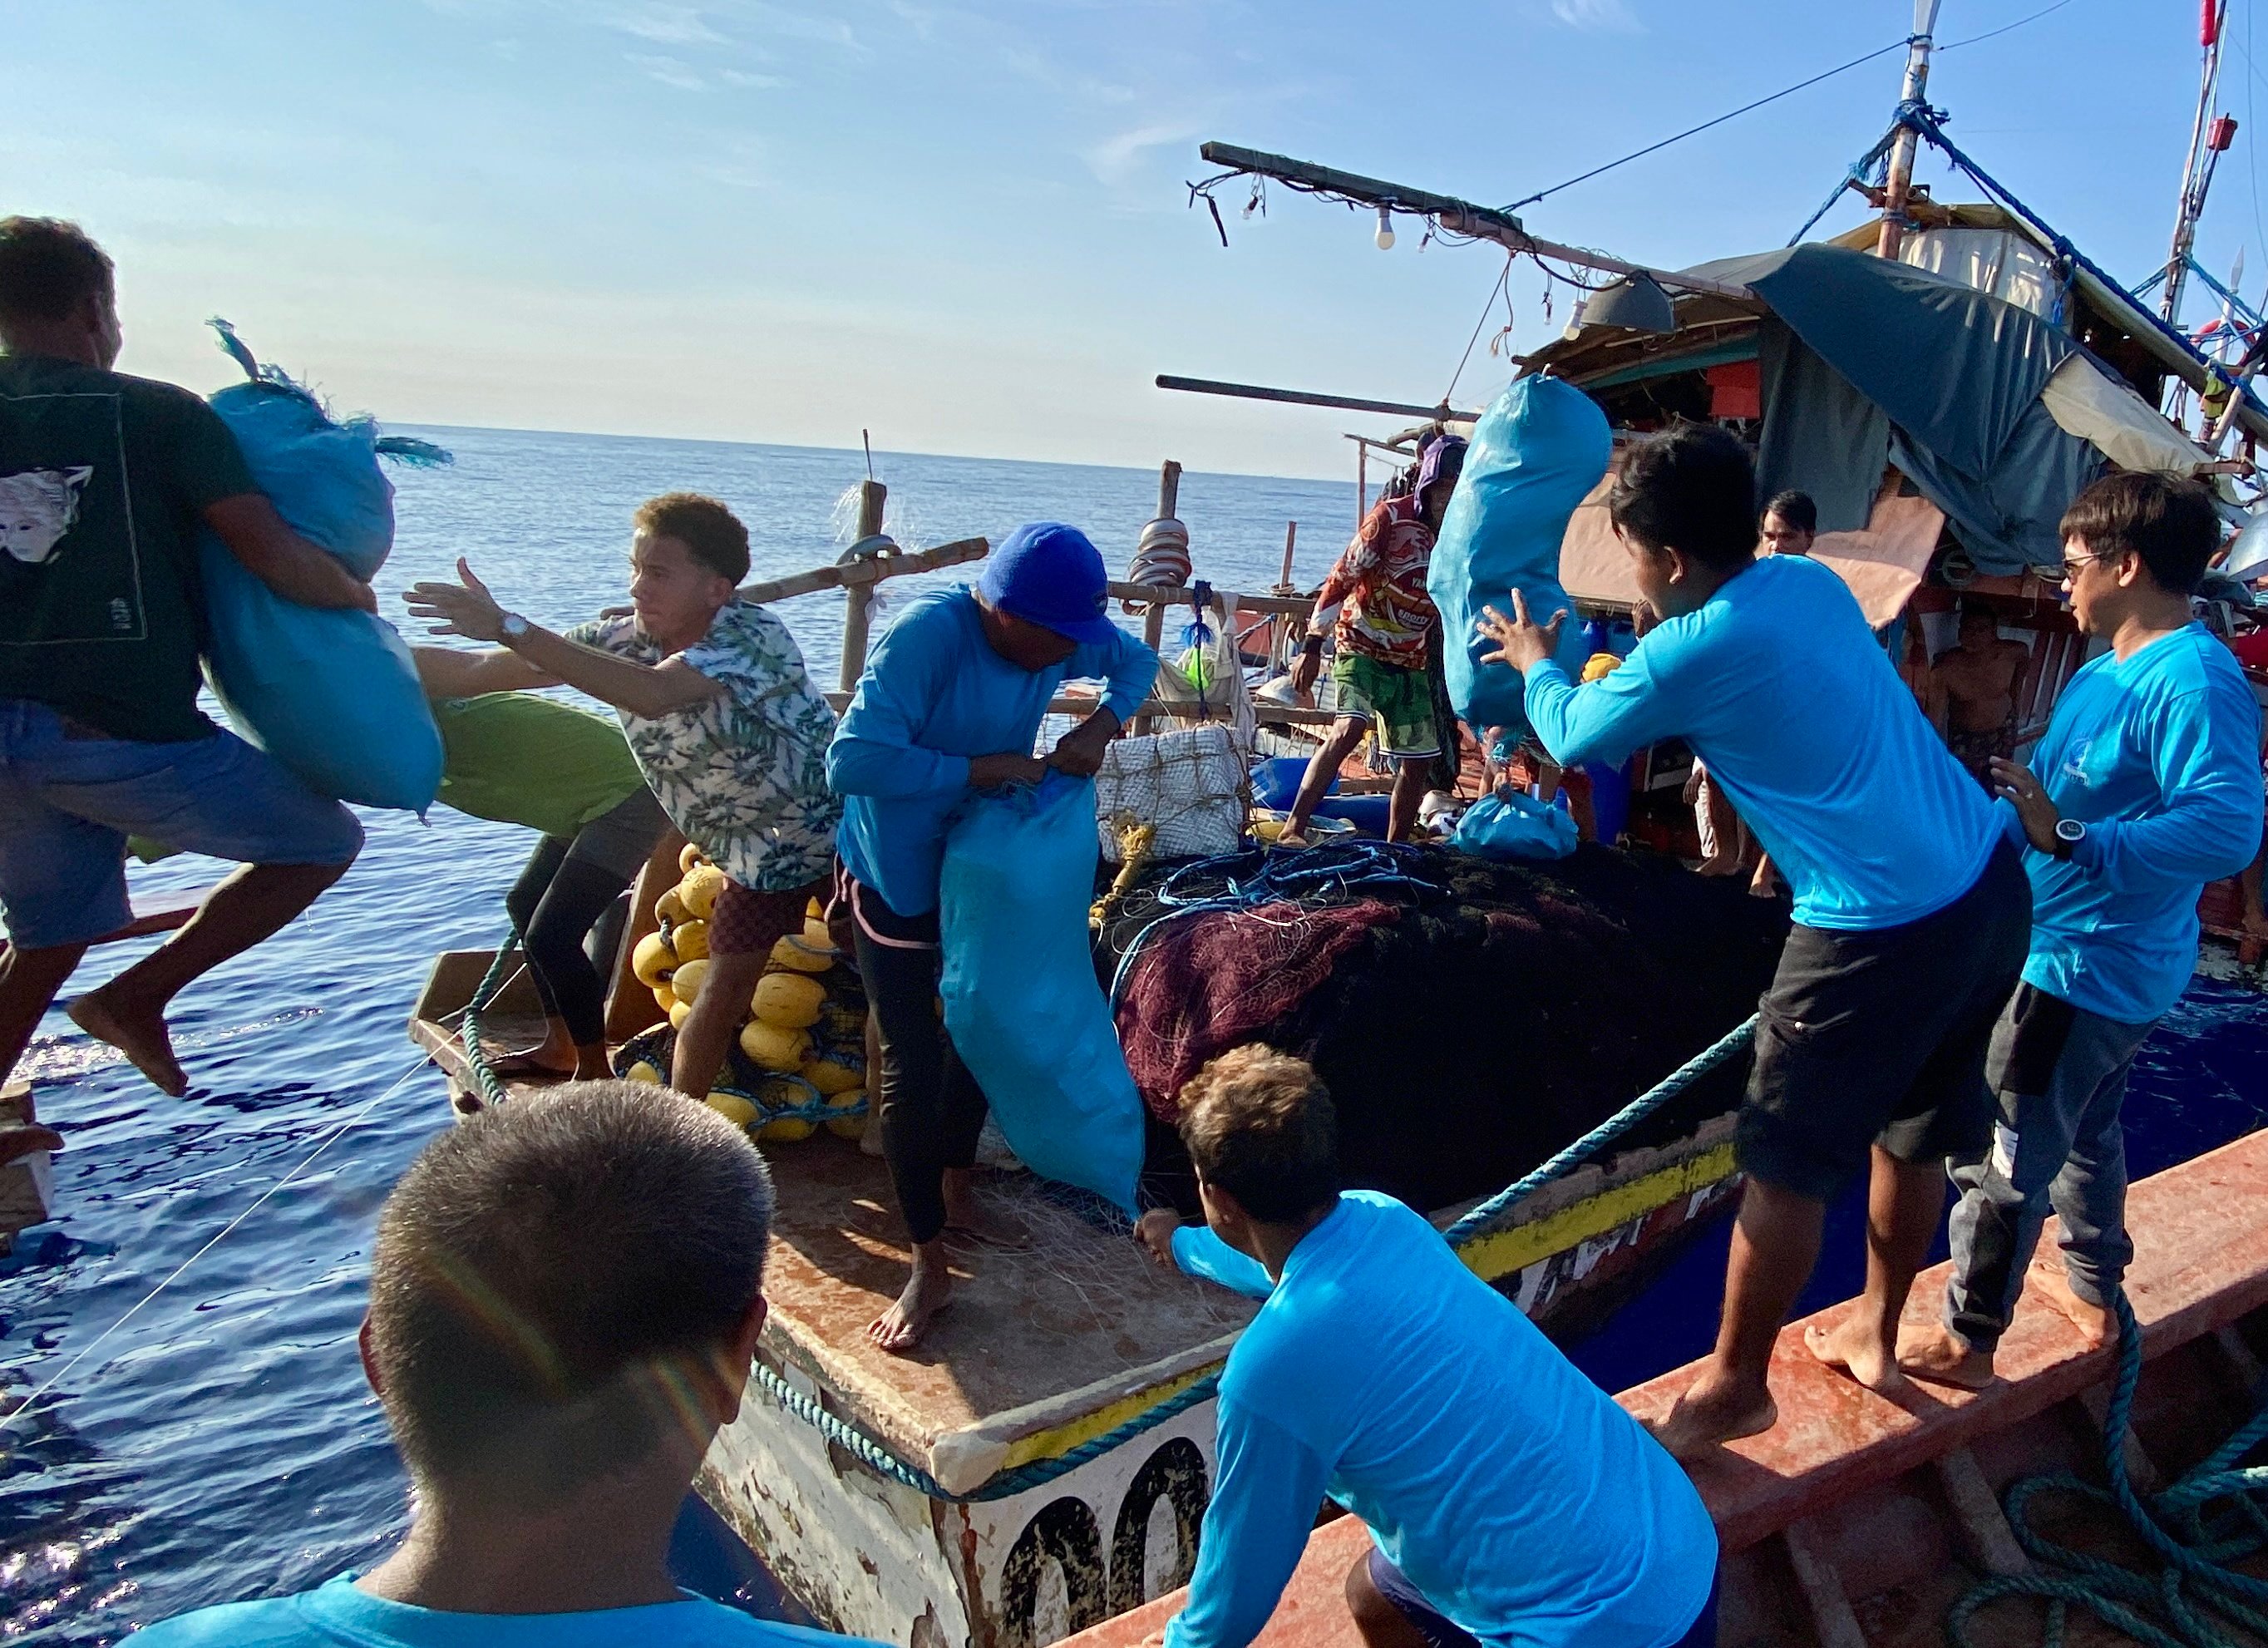 Filipino fishermen receiving supplies from volunteers near Scarborough Shoal in the disputed South China Sea. Photo: EPA-EFE